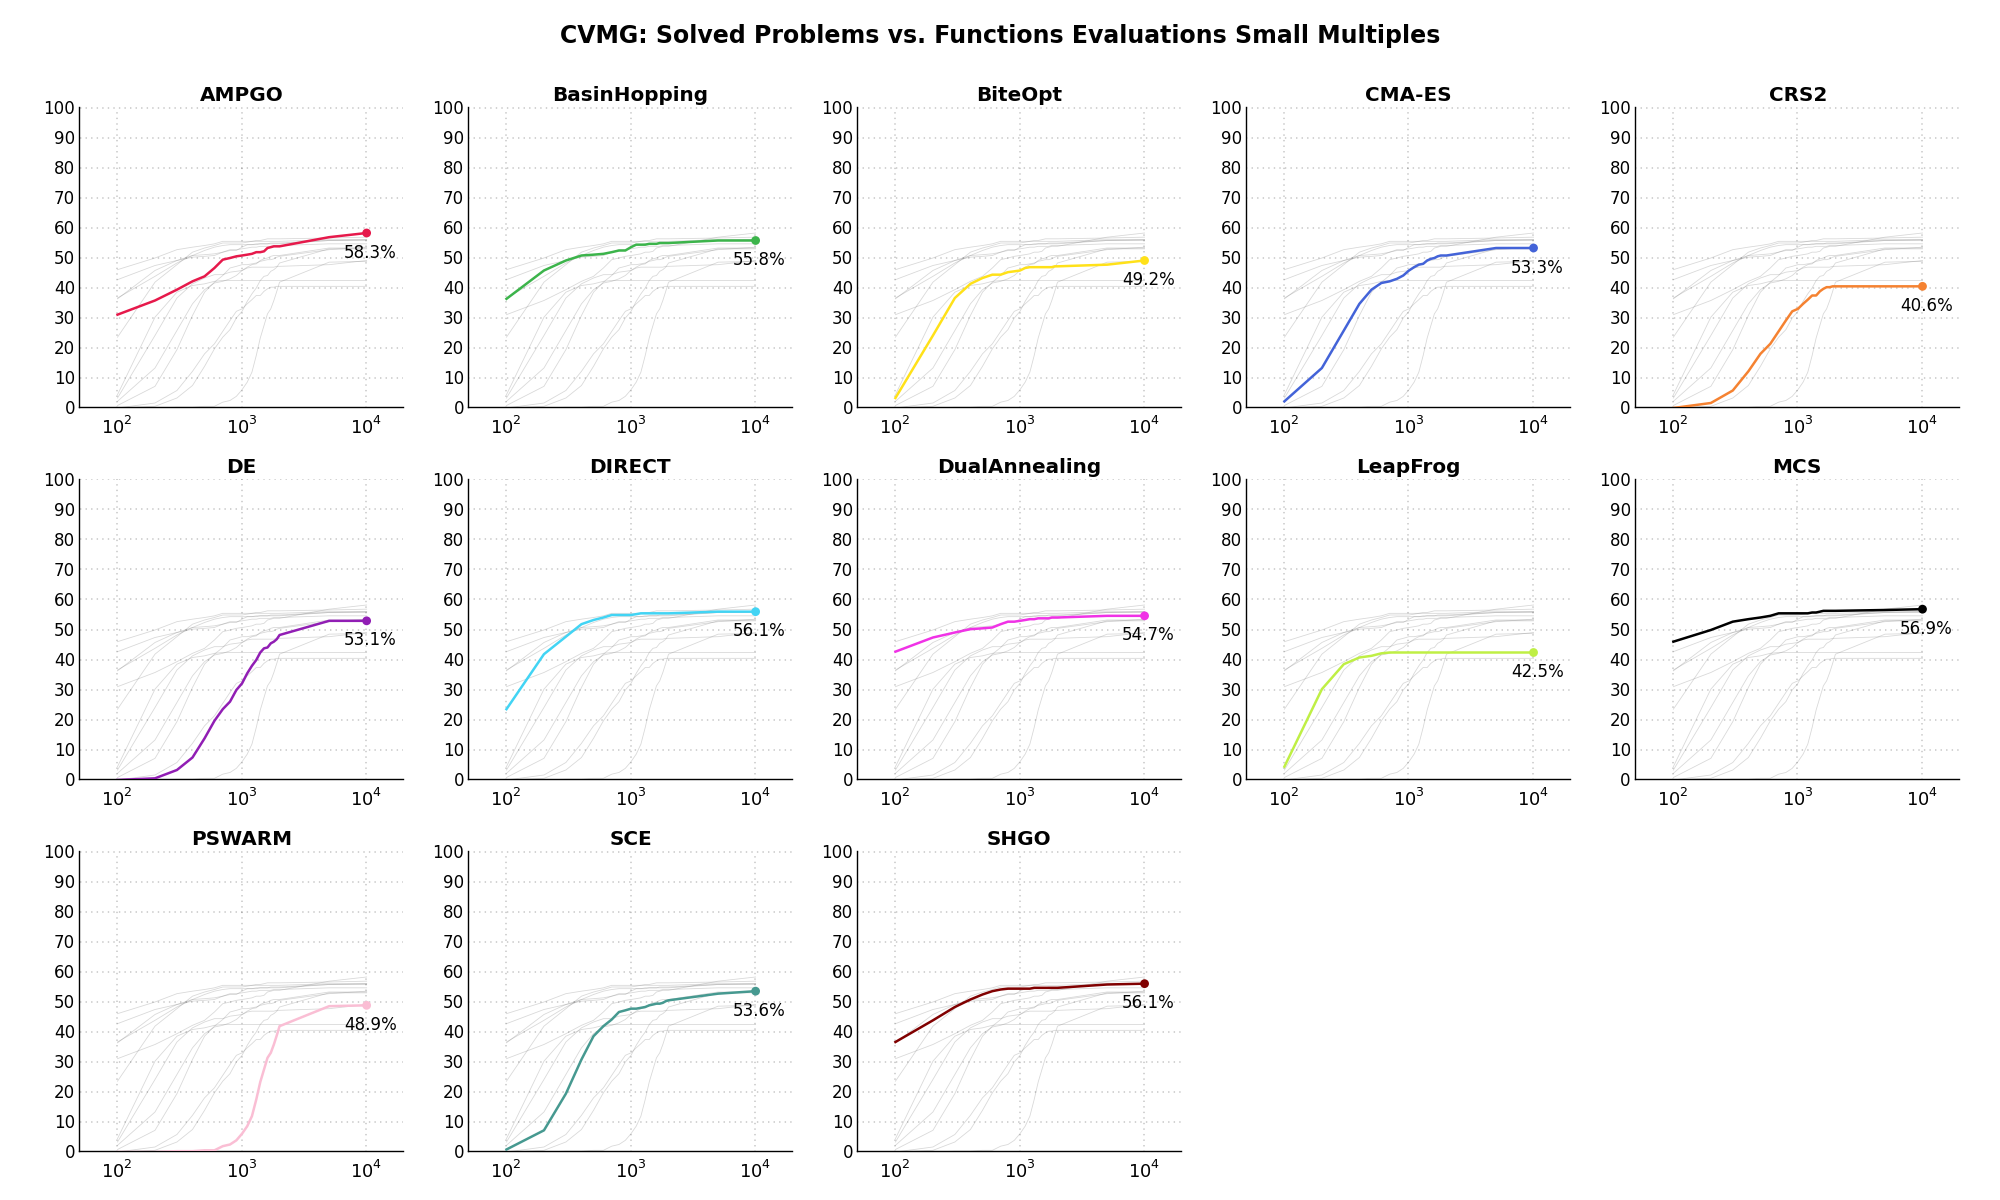 Percentage of problems solved given a fixed number of function evaluations on the CVMG test suite